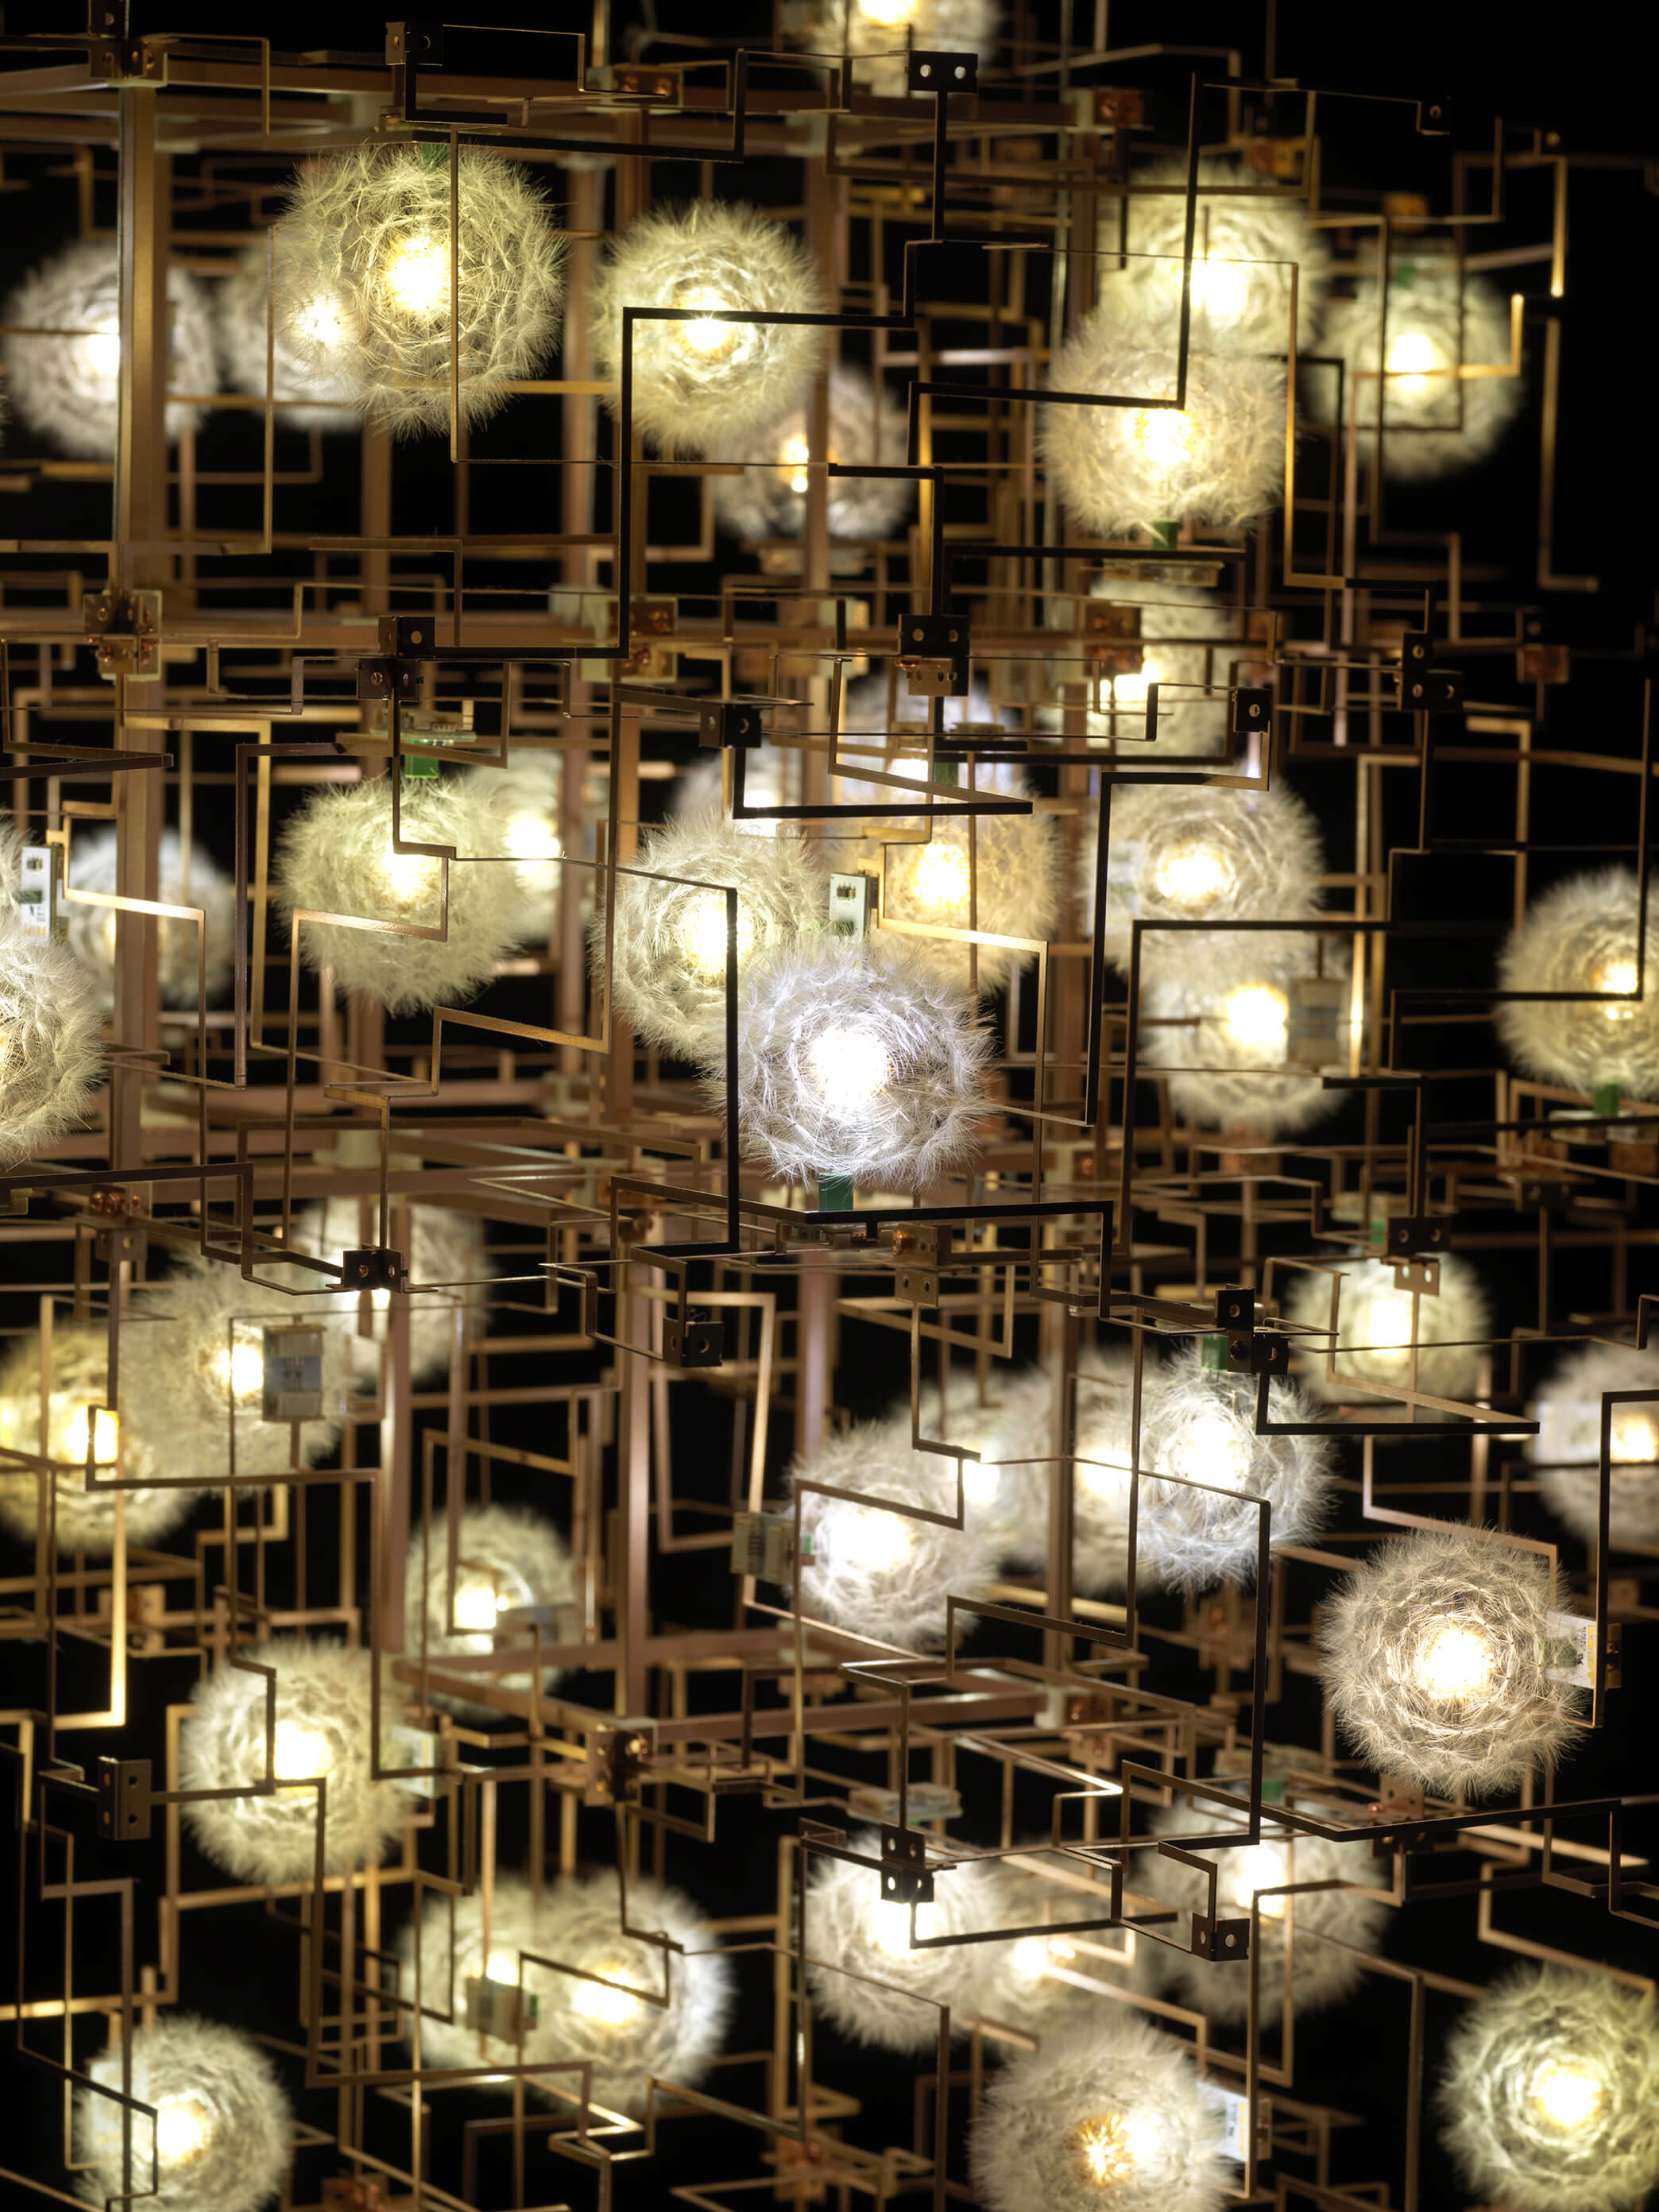 A complex grid of lights, the self titled fragile future